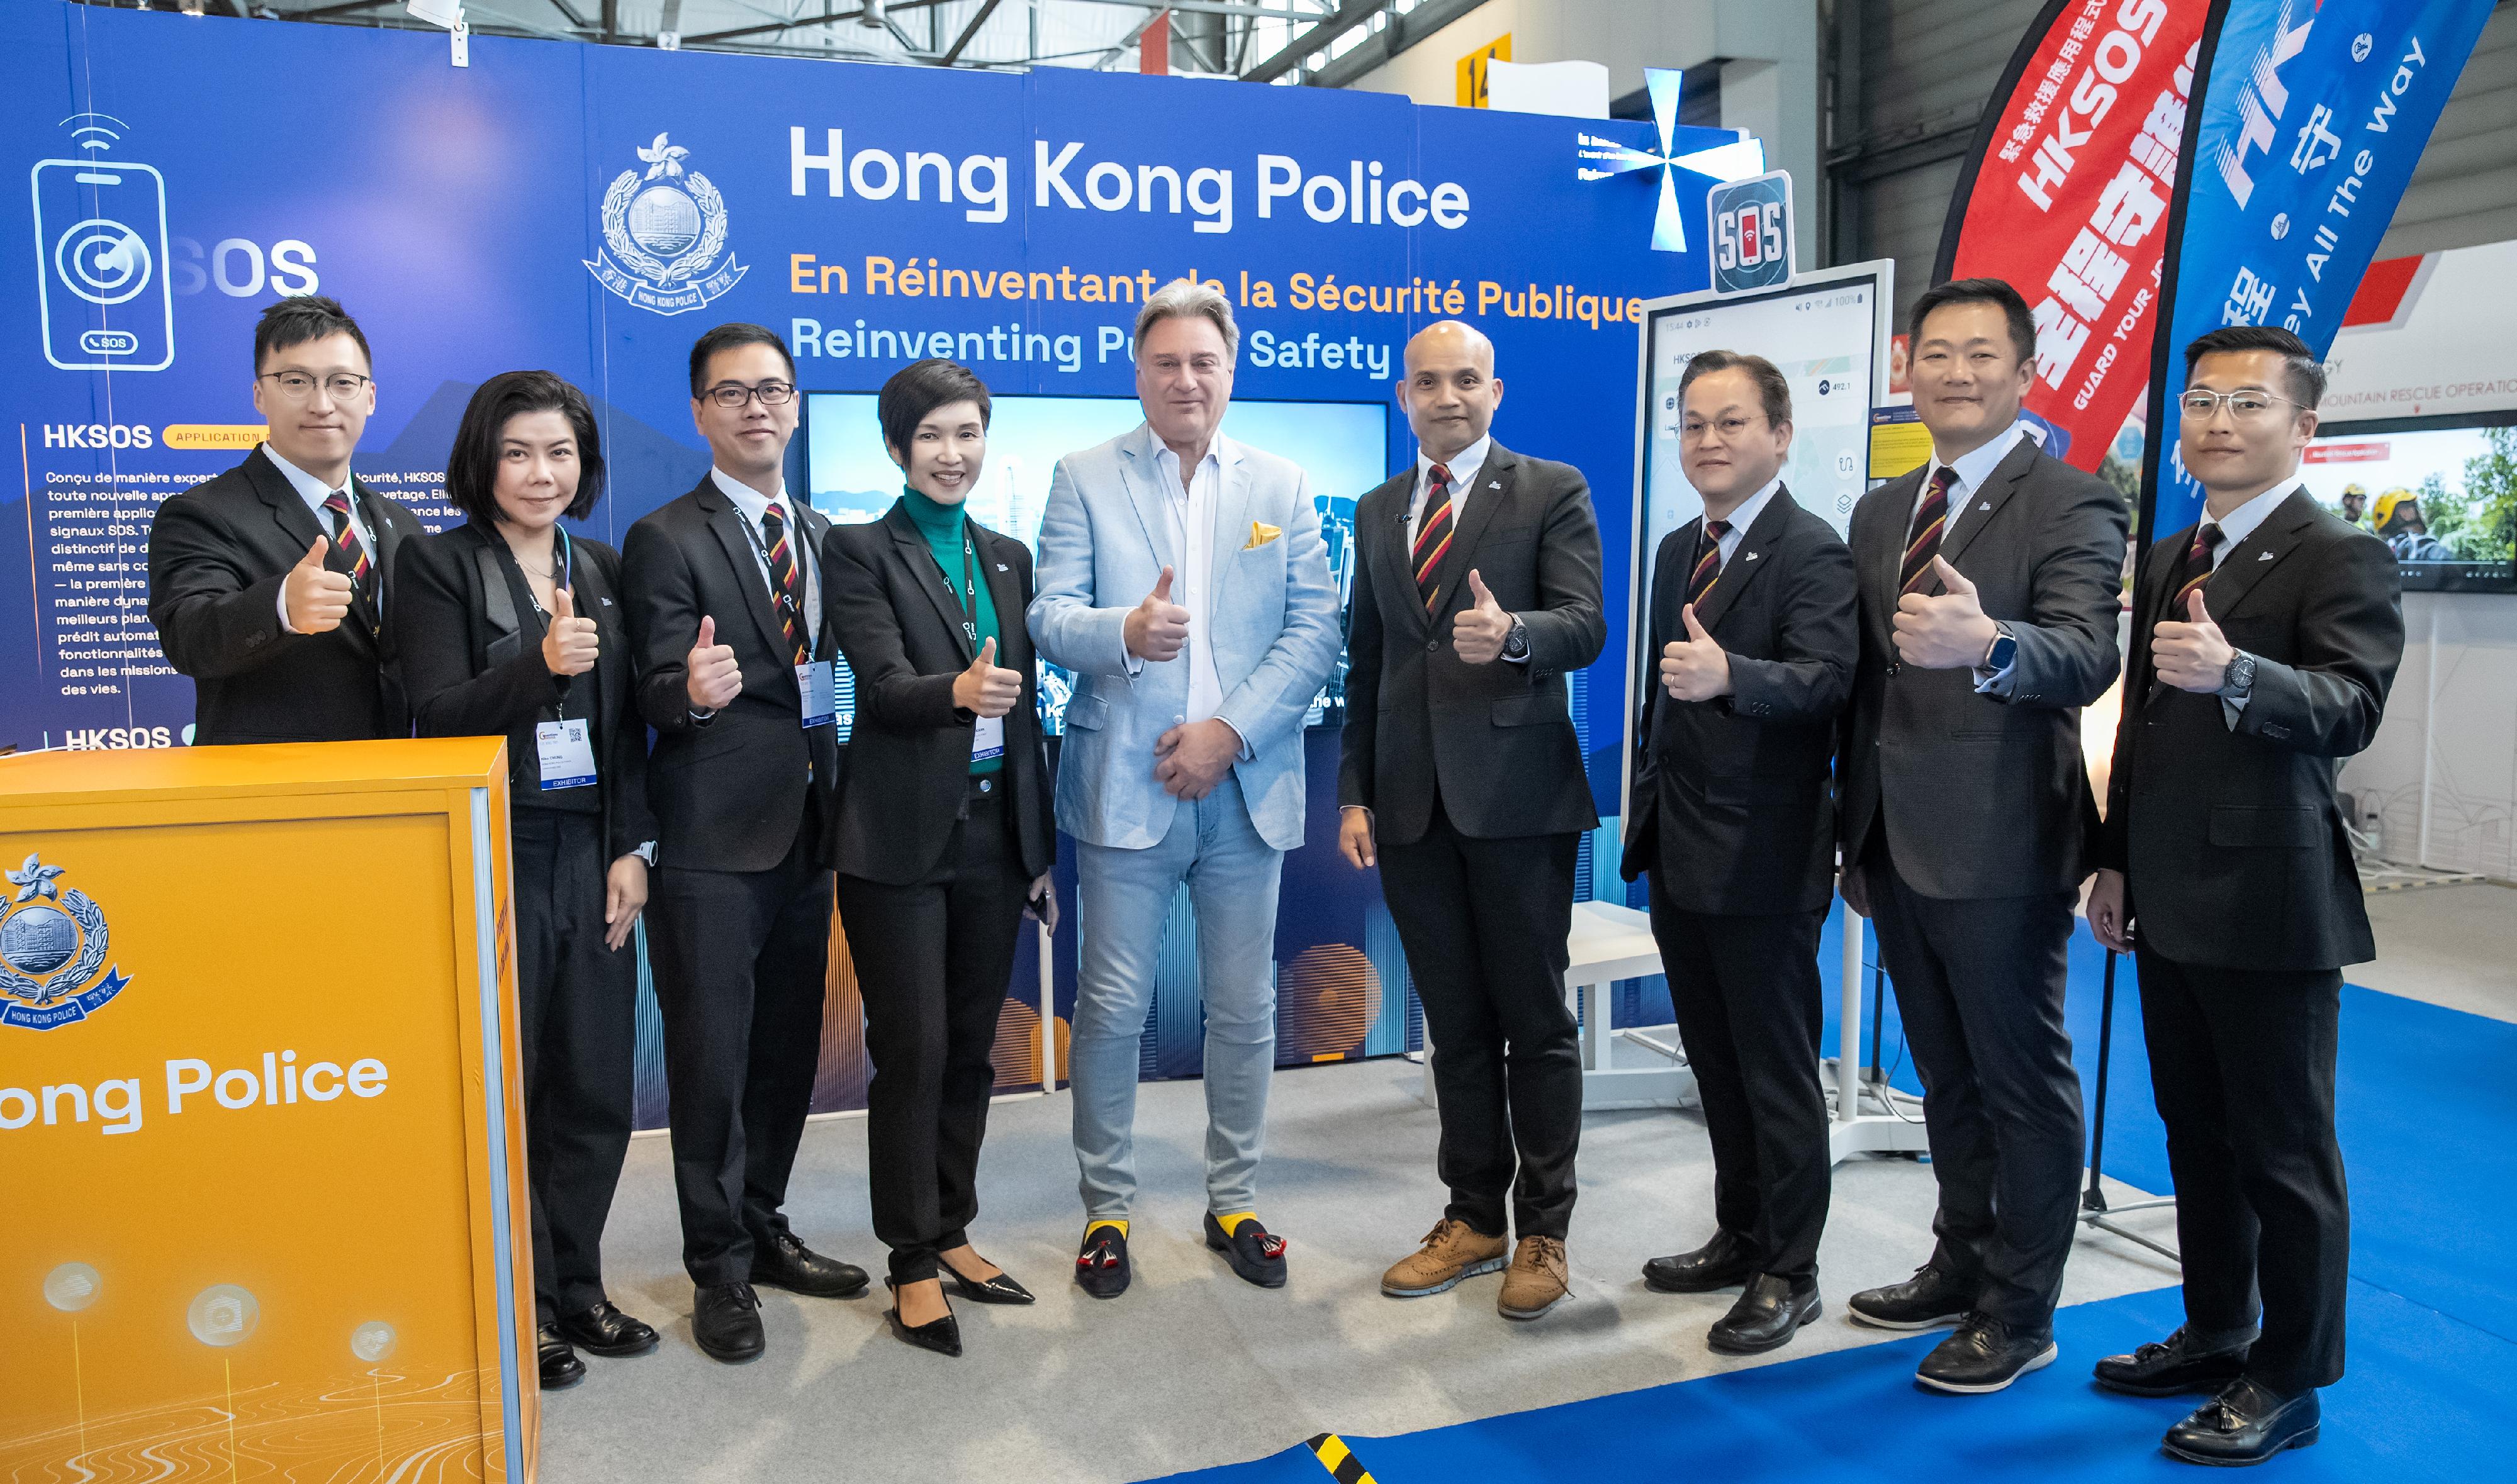 Officers of the Information Systems Wing of the Hong Kong Police Force participated in 49th International Exhibition of Inventions of Geneva, which was held between April 17 and 21 in Geneva, Switzerland. Photo shows the President of the Jury of the International Exhibition of Inventions of Geneva, Mr David Taji (centre), who highly praises and acknowledges the level of sophistication and creativity of the Hong Kong Police's technology projects.